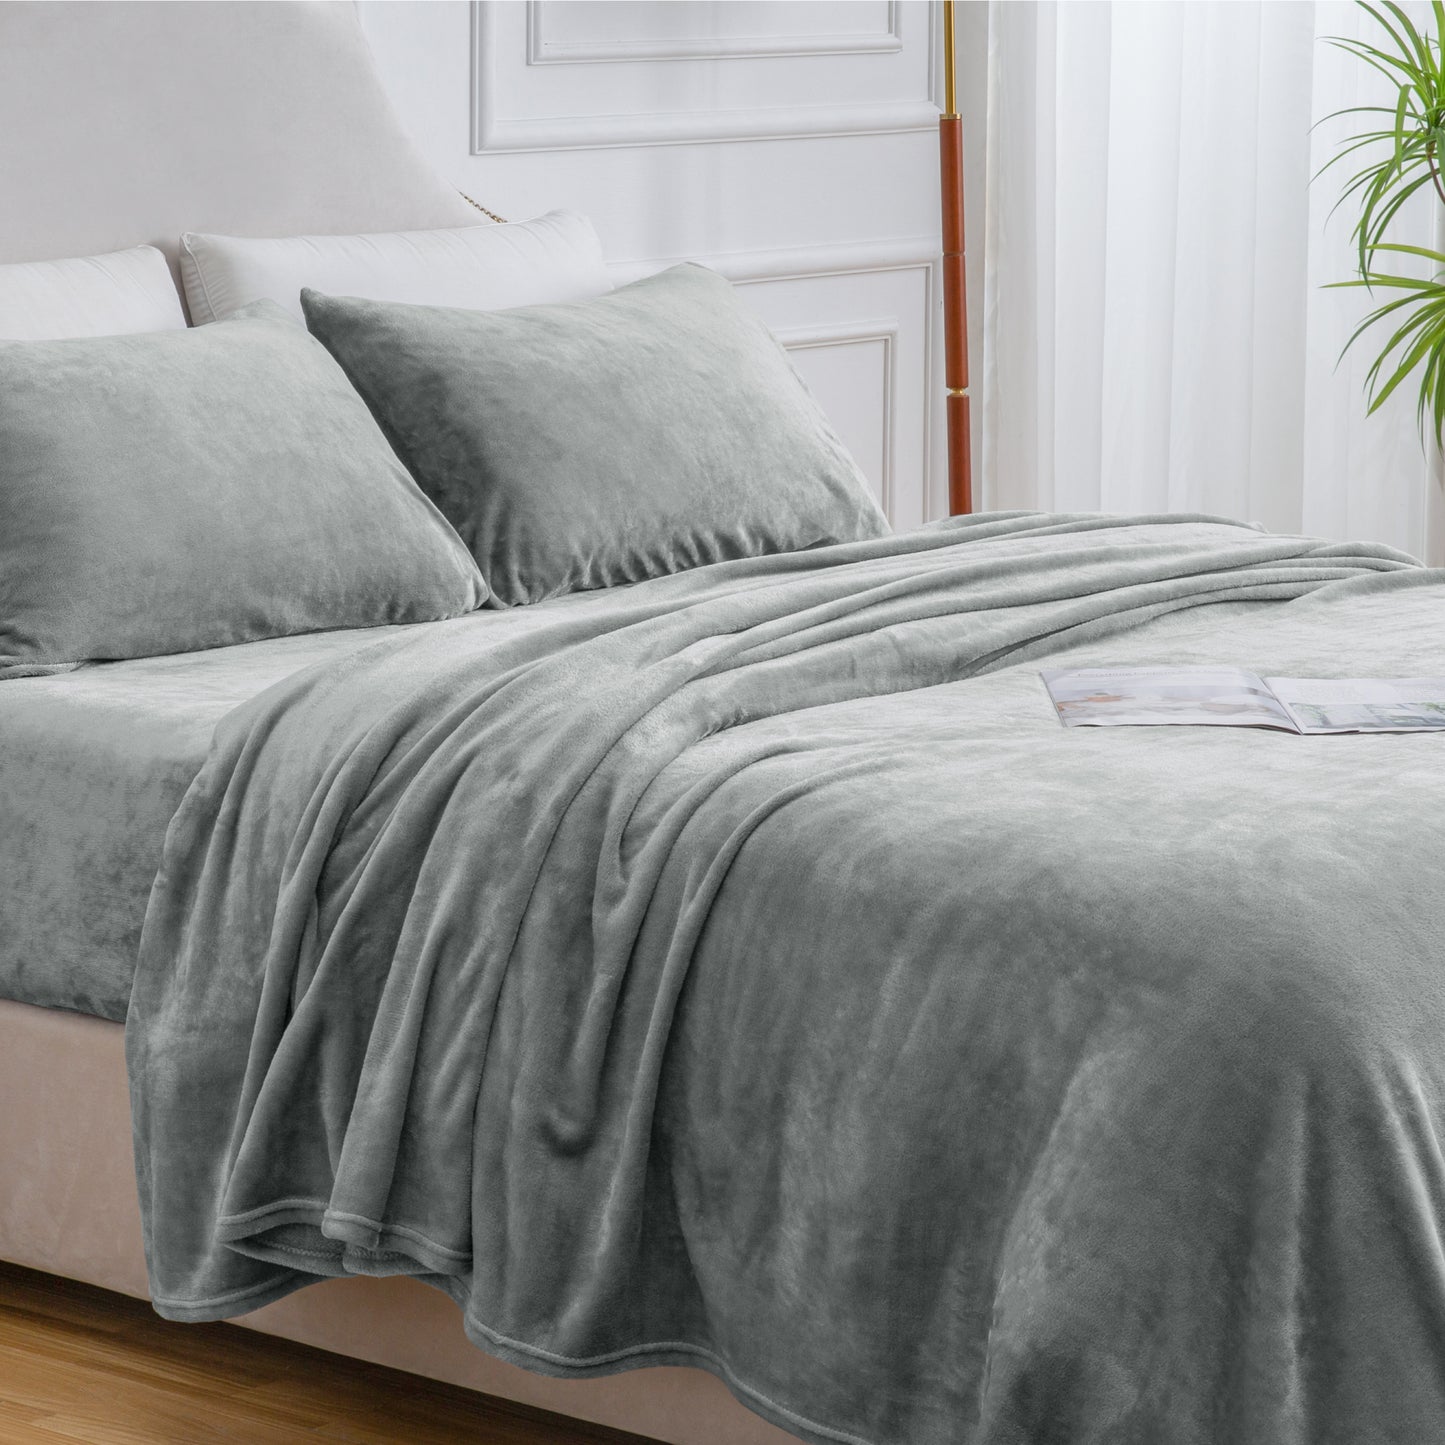 Flannel Sheets Twin Size Grey - Super Soft Fleece Sheets Set Fluffy Extra Plush